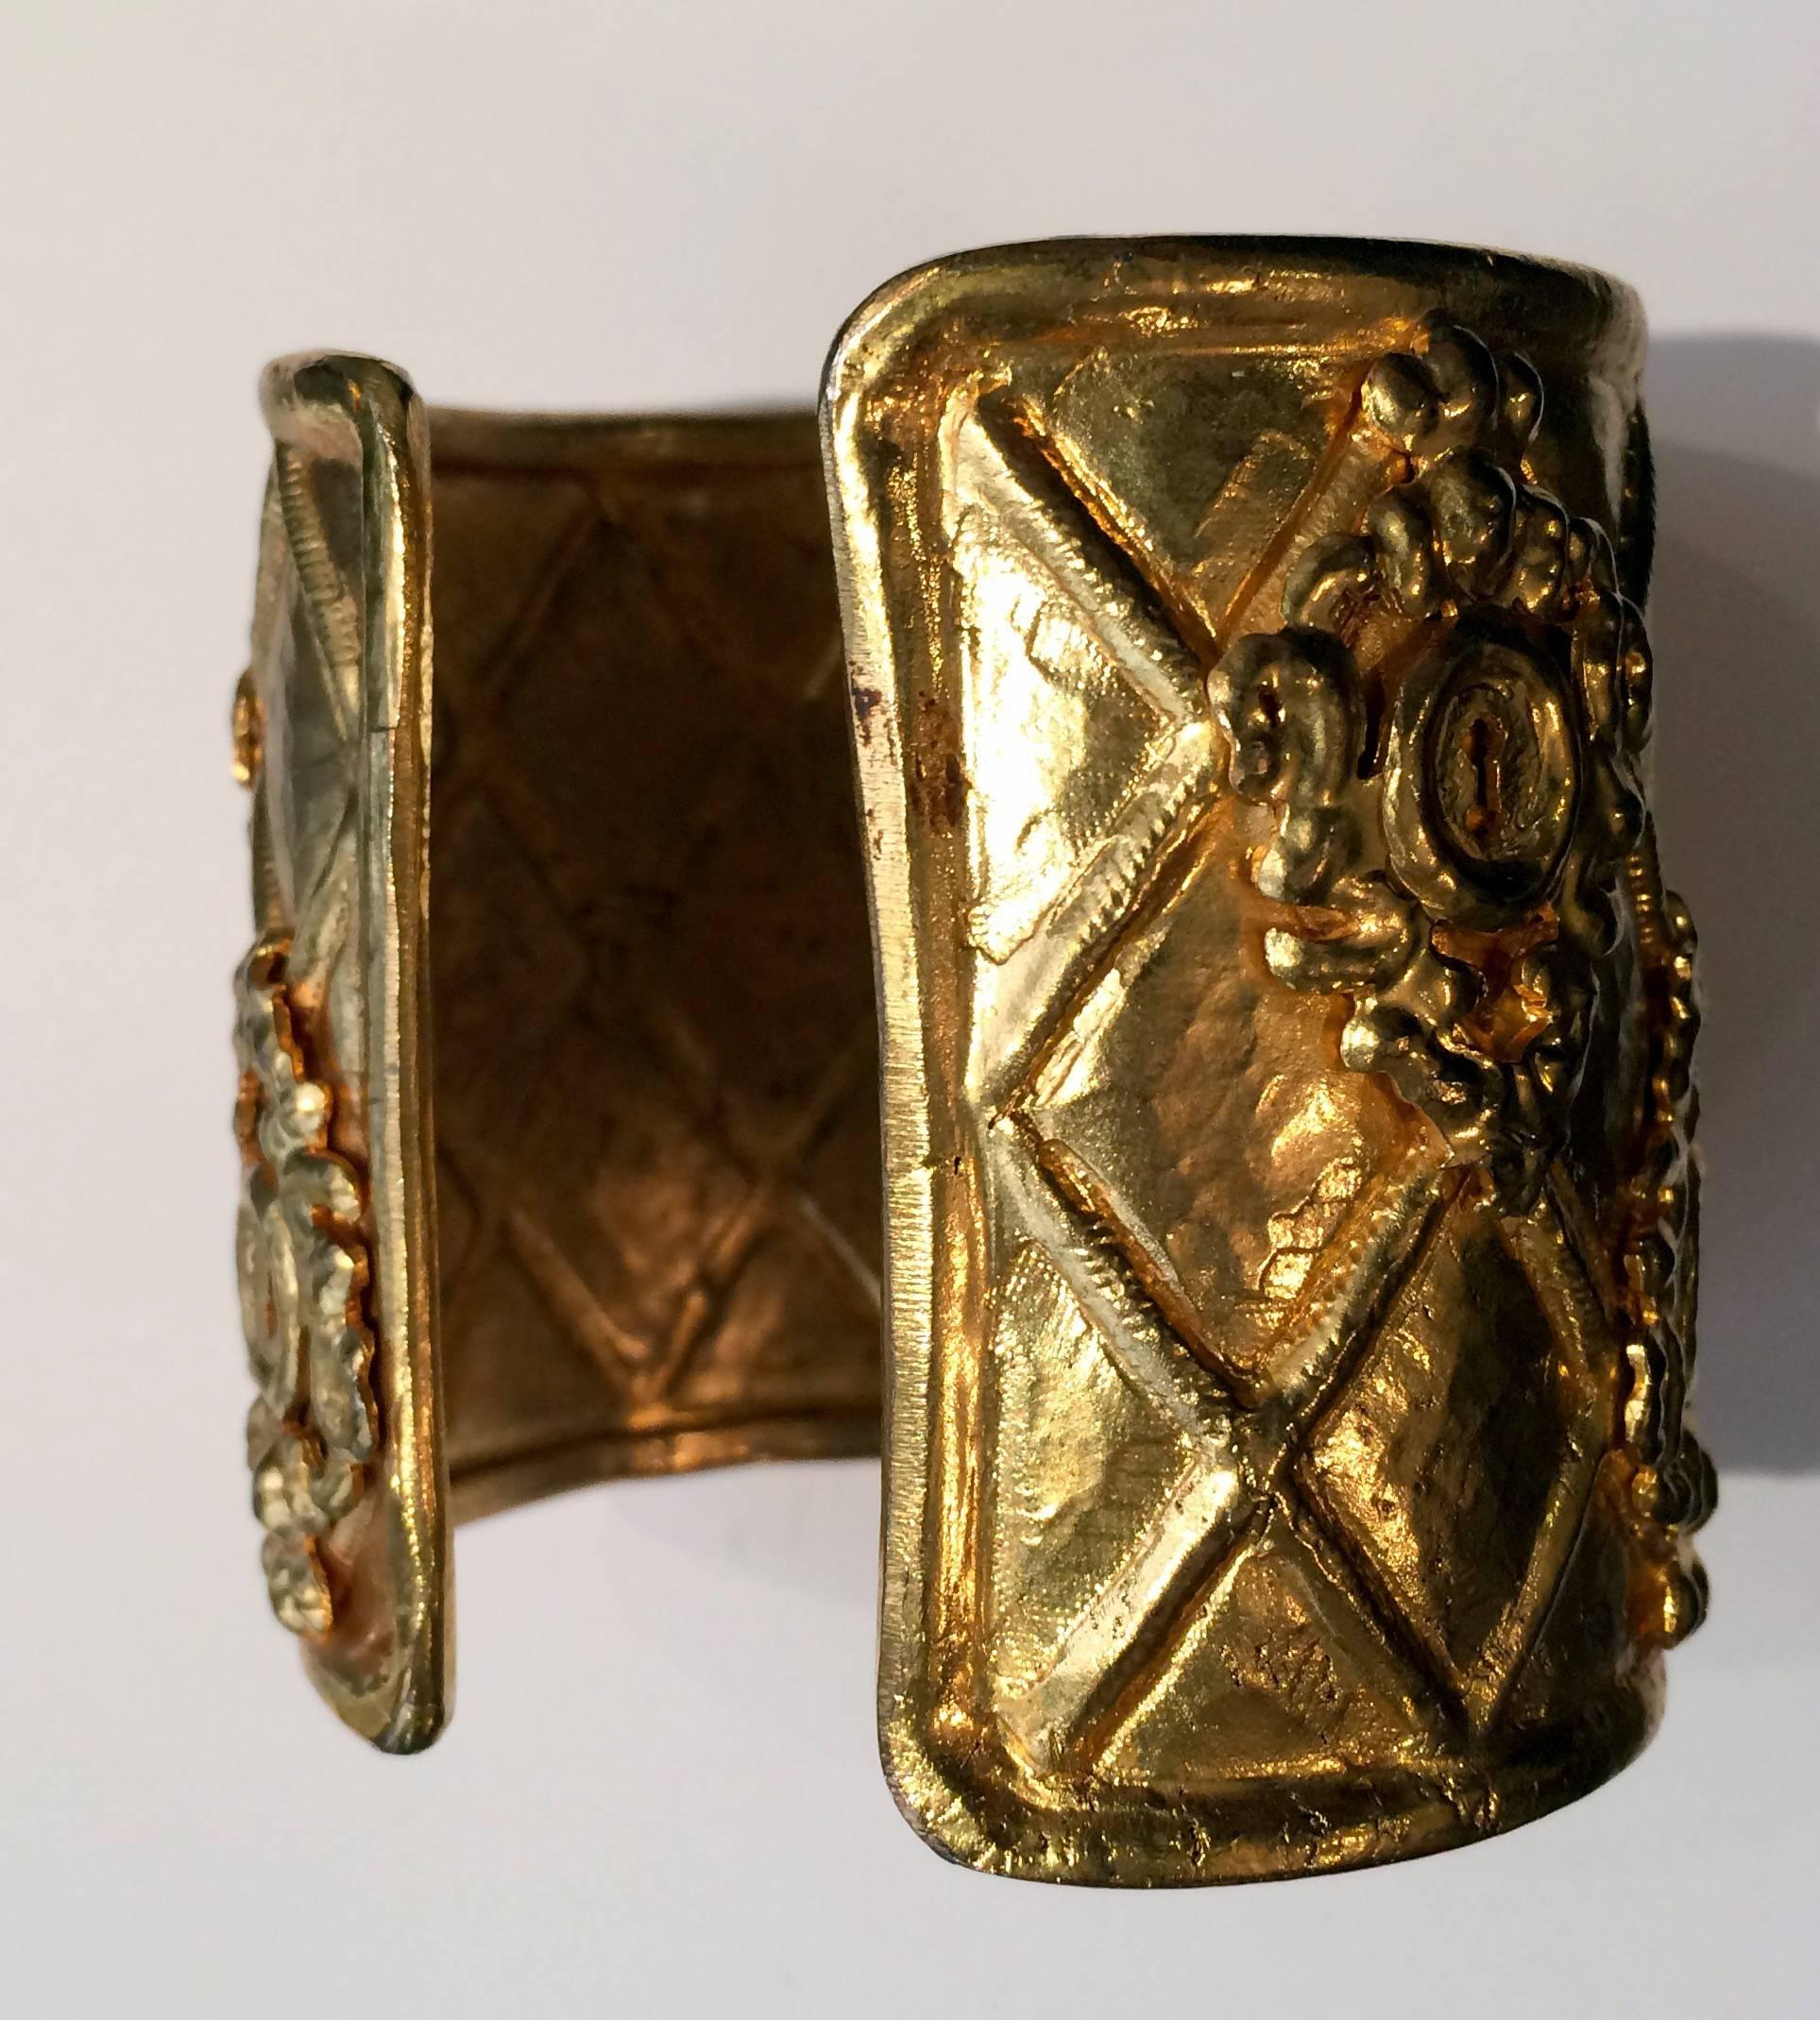 1980s Rochas gold tone large cuff bracelet featuring a delicate work.
Height:2,3in. (6cm)  Diameter:2,7in (7cm)
In excellent vintage condition. Made in France.
We guarantee you will receive this gorgeous item as described and showed on photos.

